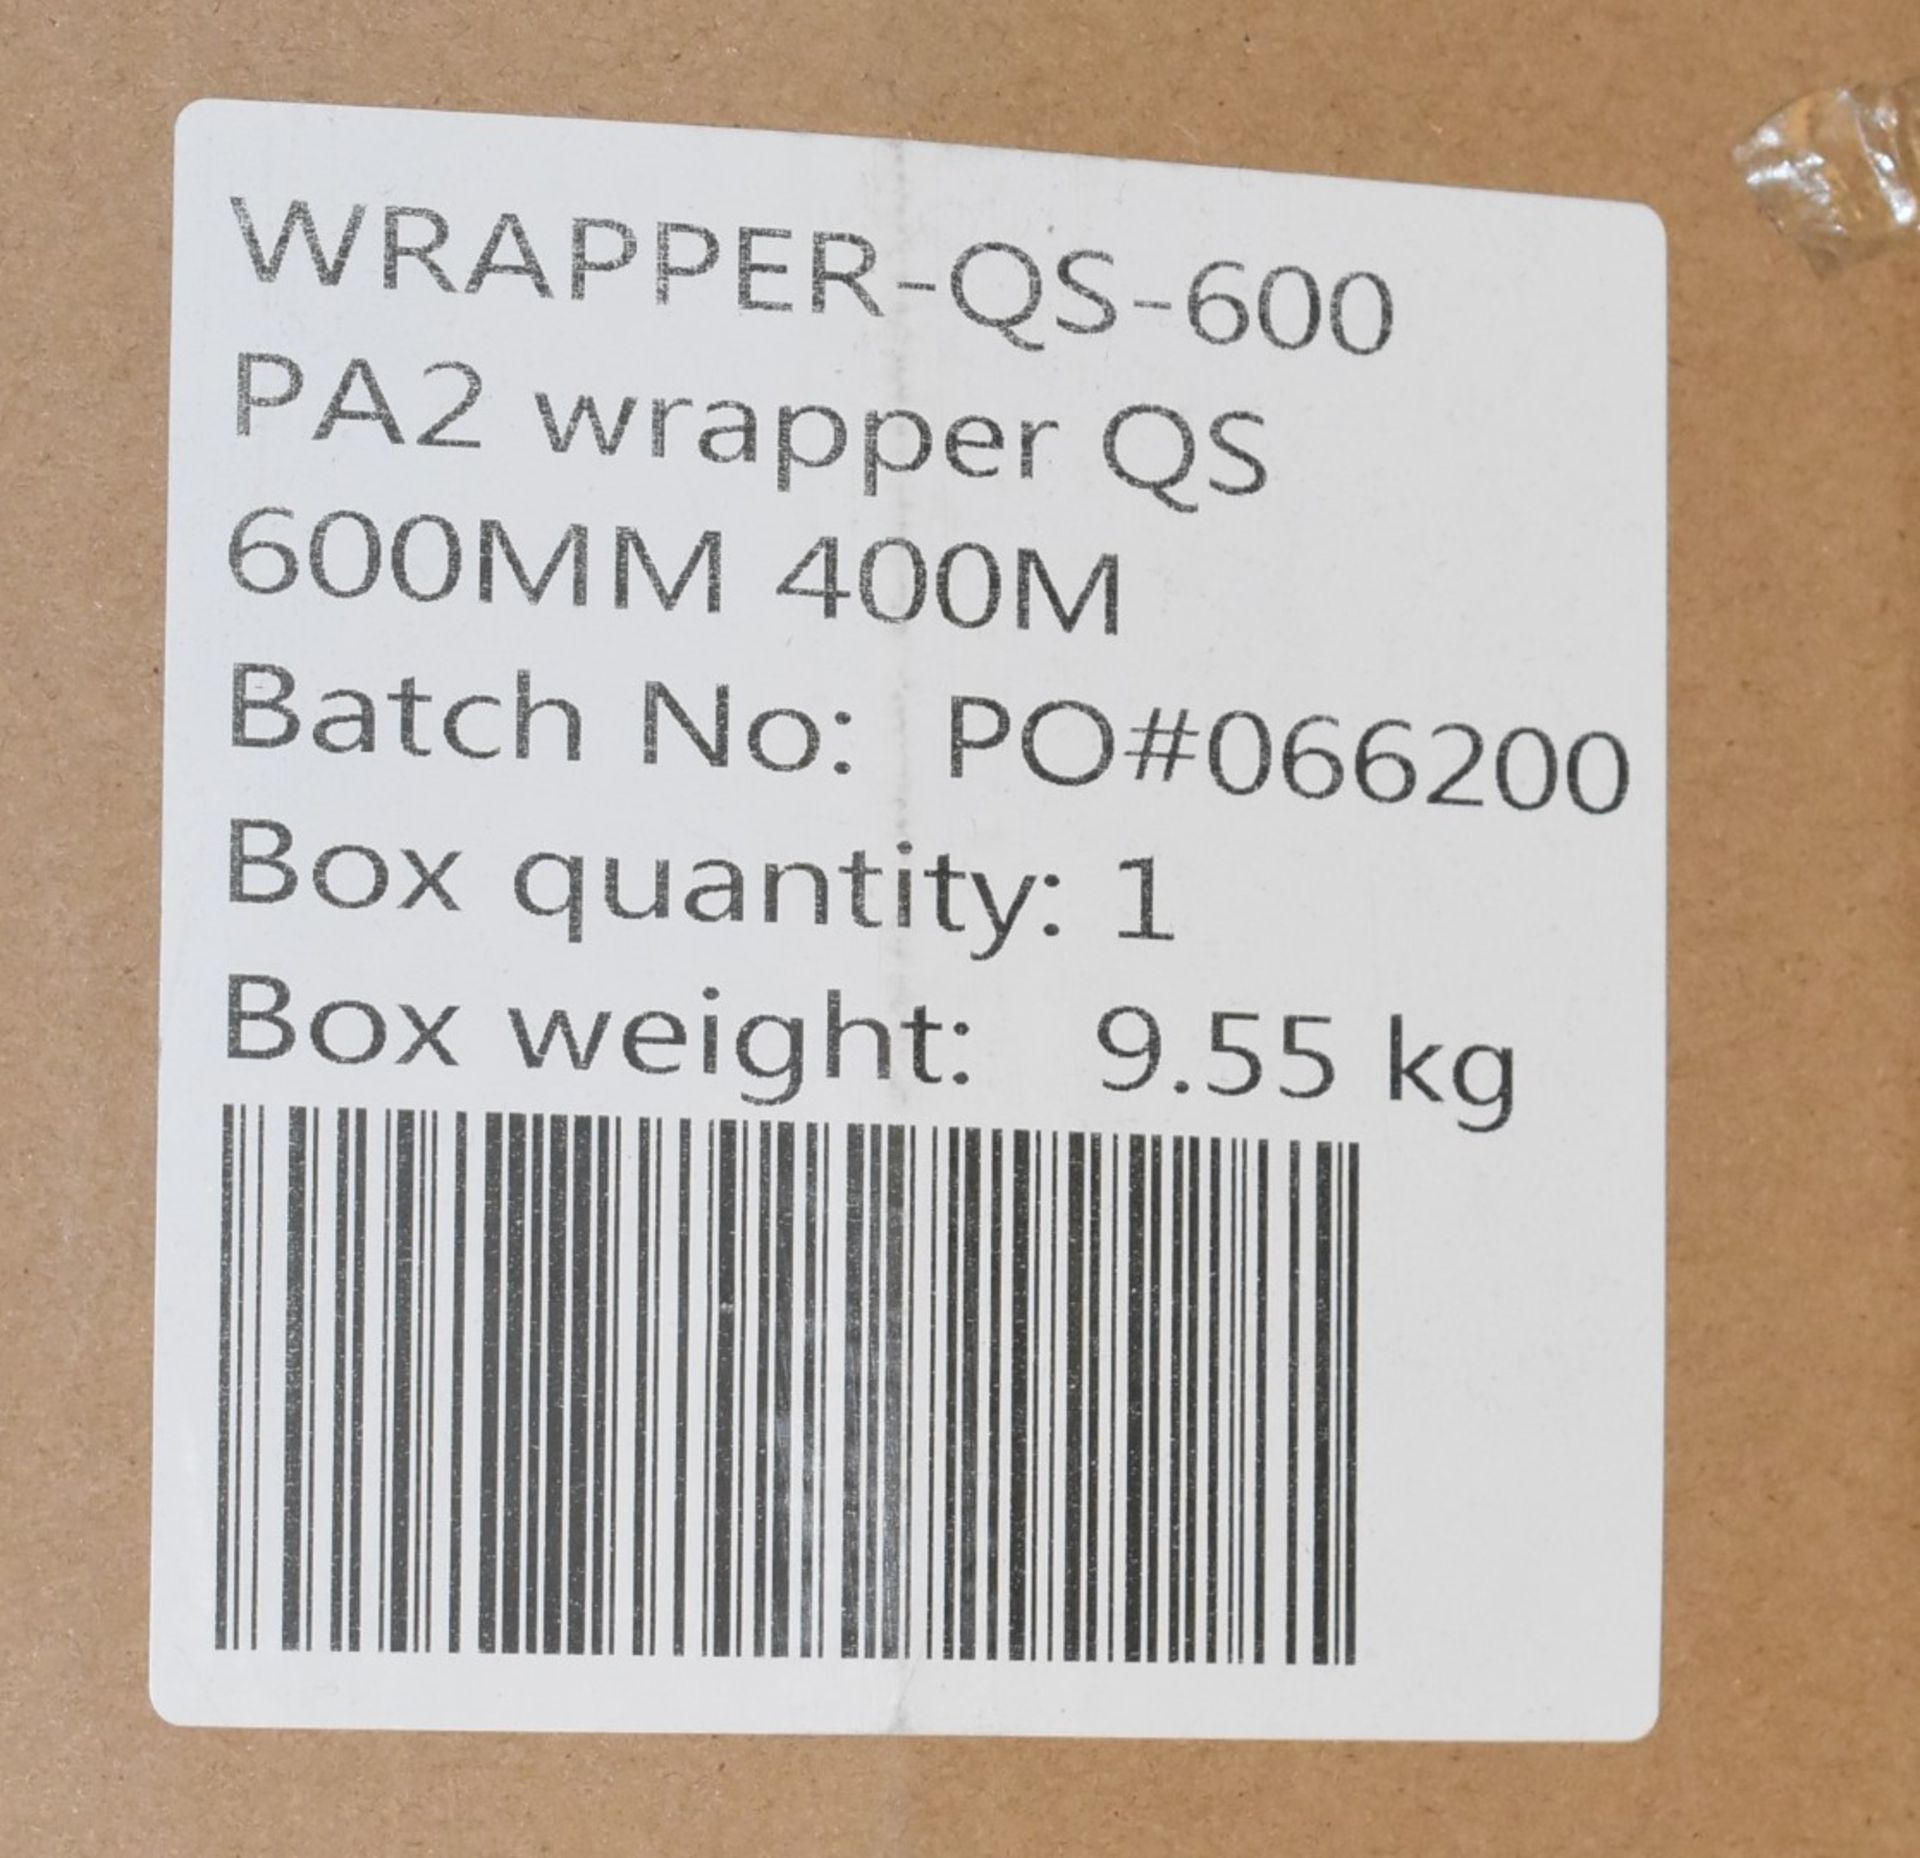 2 x Rolls of Kite Mini Air Wrapper Cushion Packaging - 400 Meter Rolls of 600mm Uninflated Air - Image 3 of 3